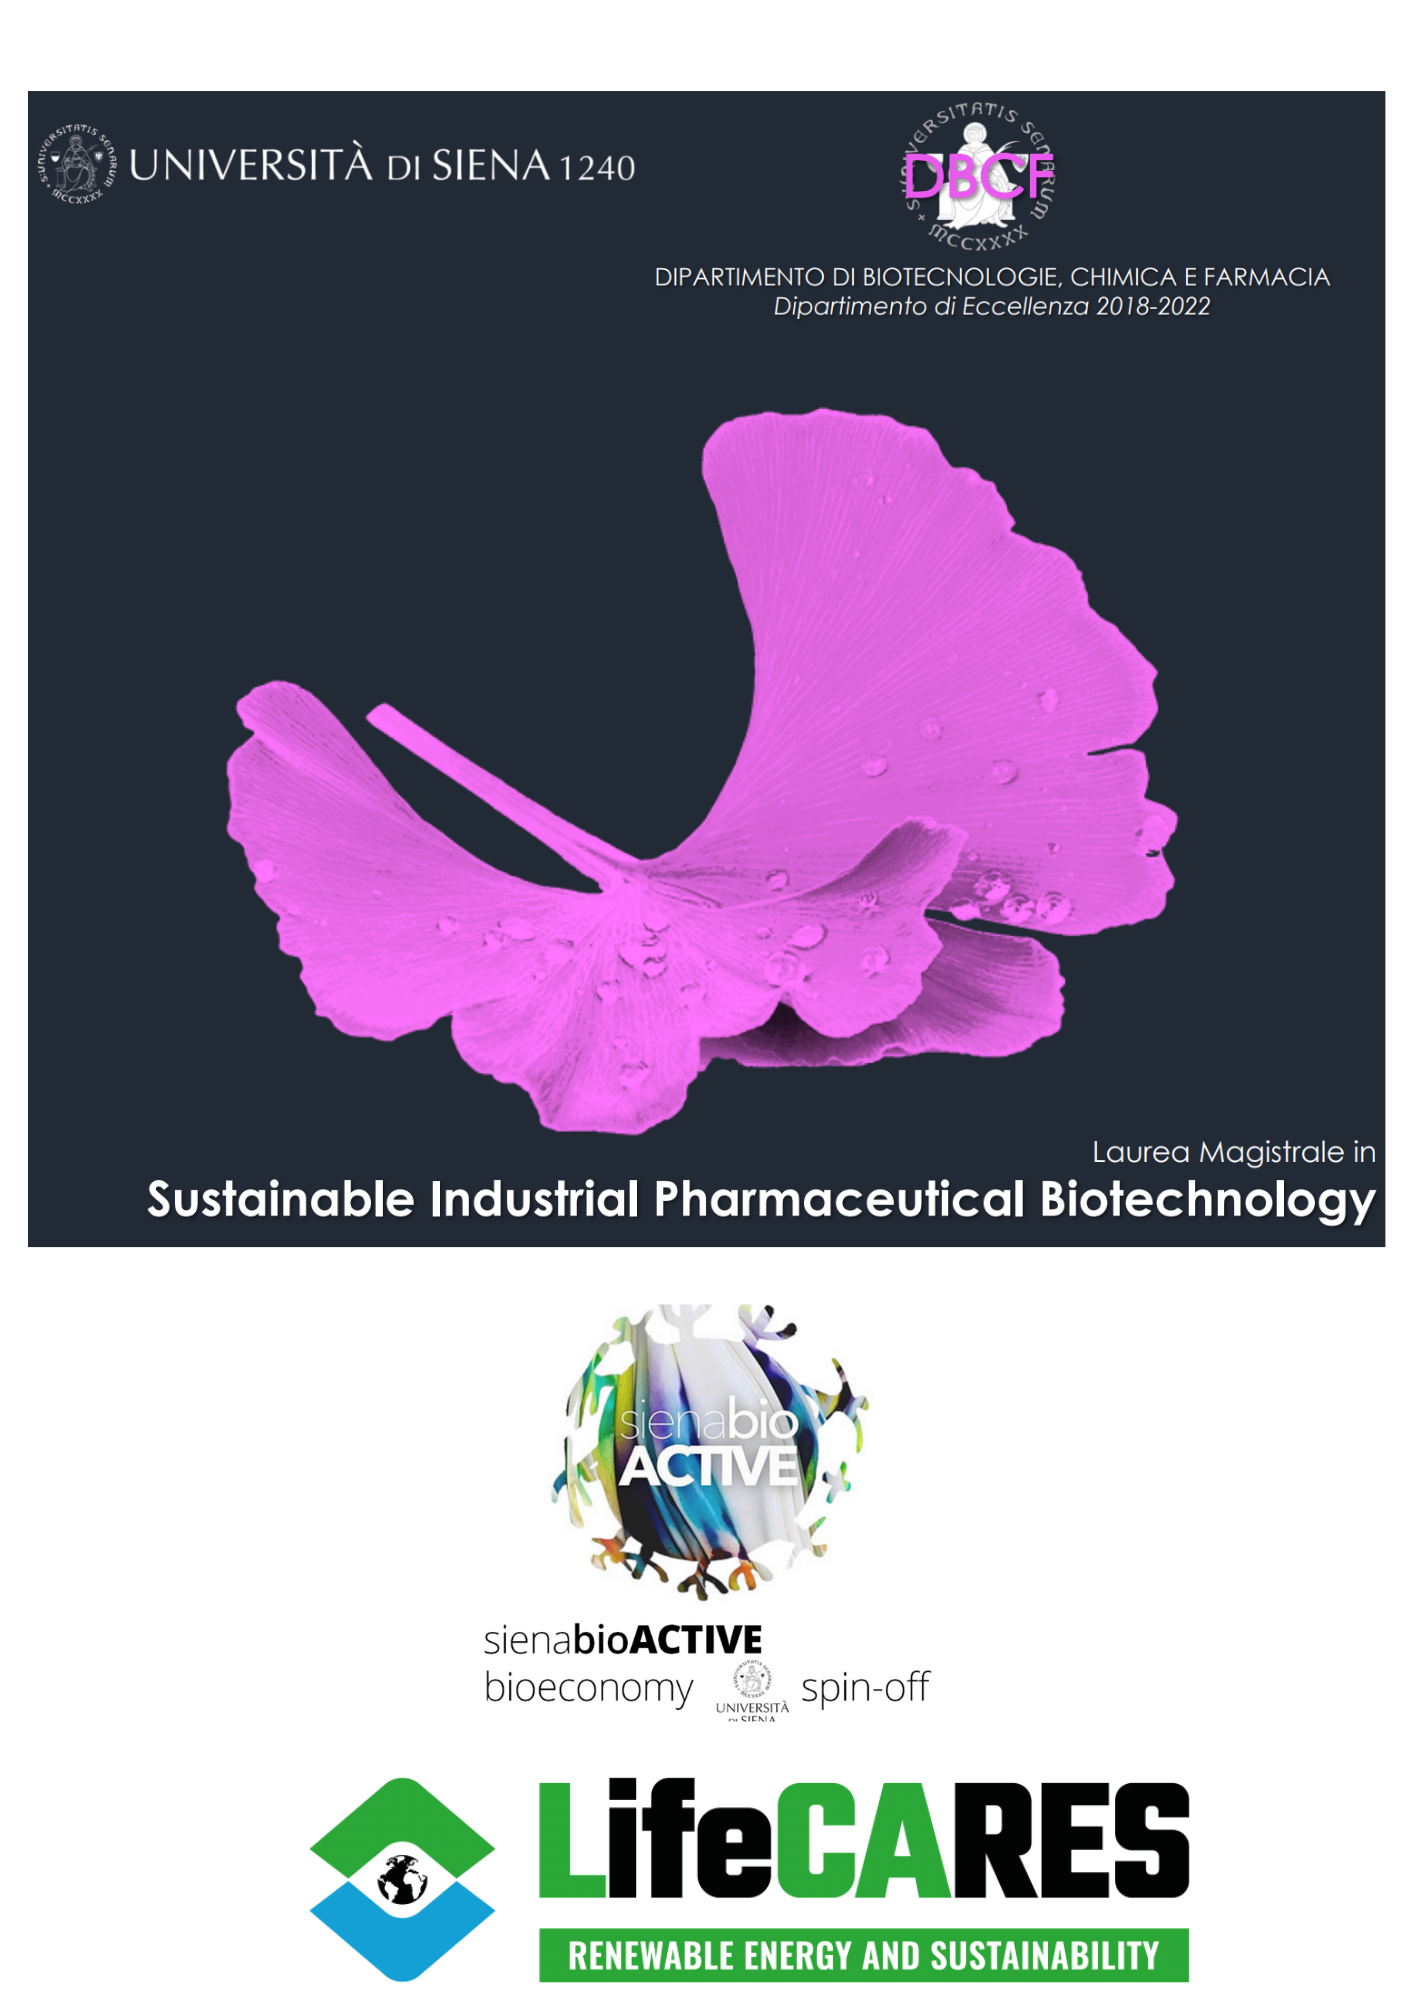 Sustainable Industrial Pharmaceutical Biotechnology, SienabioACTIVE & LIFECARES